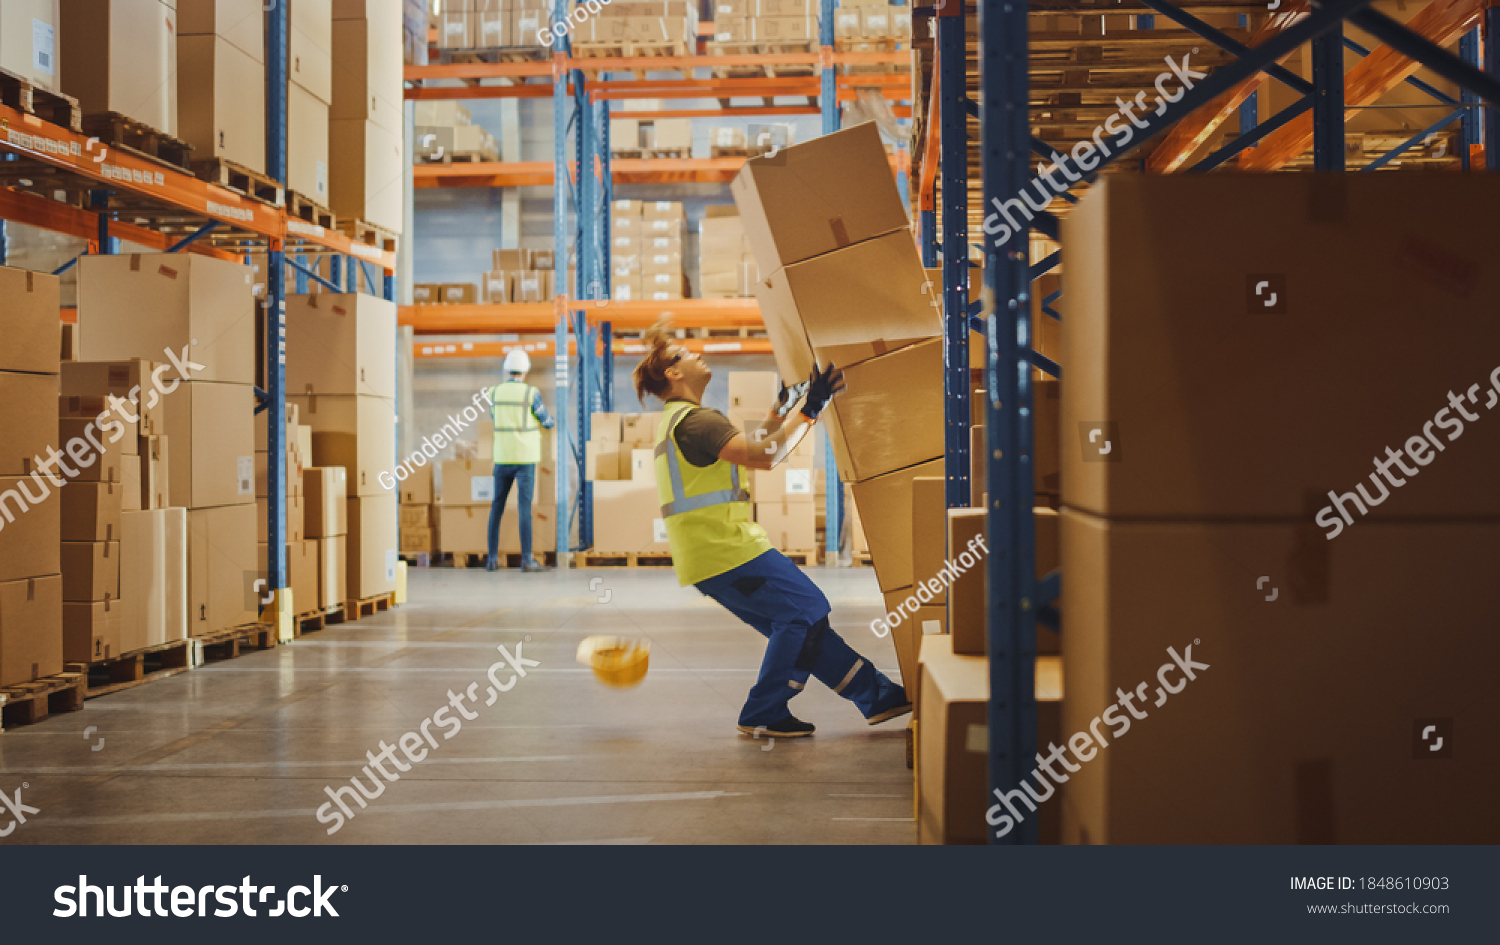 Shot of a Warehouse Worker Has Work Related Accident. He is Falling Down BeforeTrying to Pick Up Heavy Cardboard Box from the Shelf. Hard Injury at Work. #1848610903